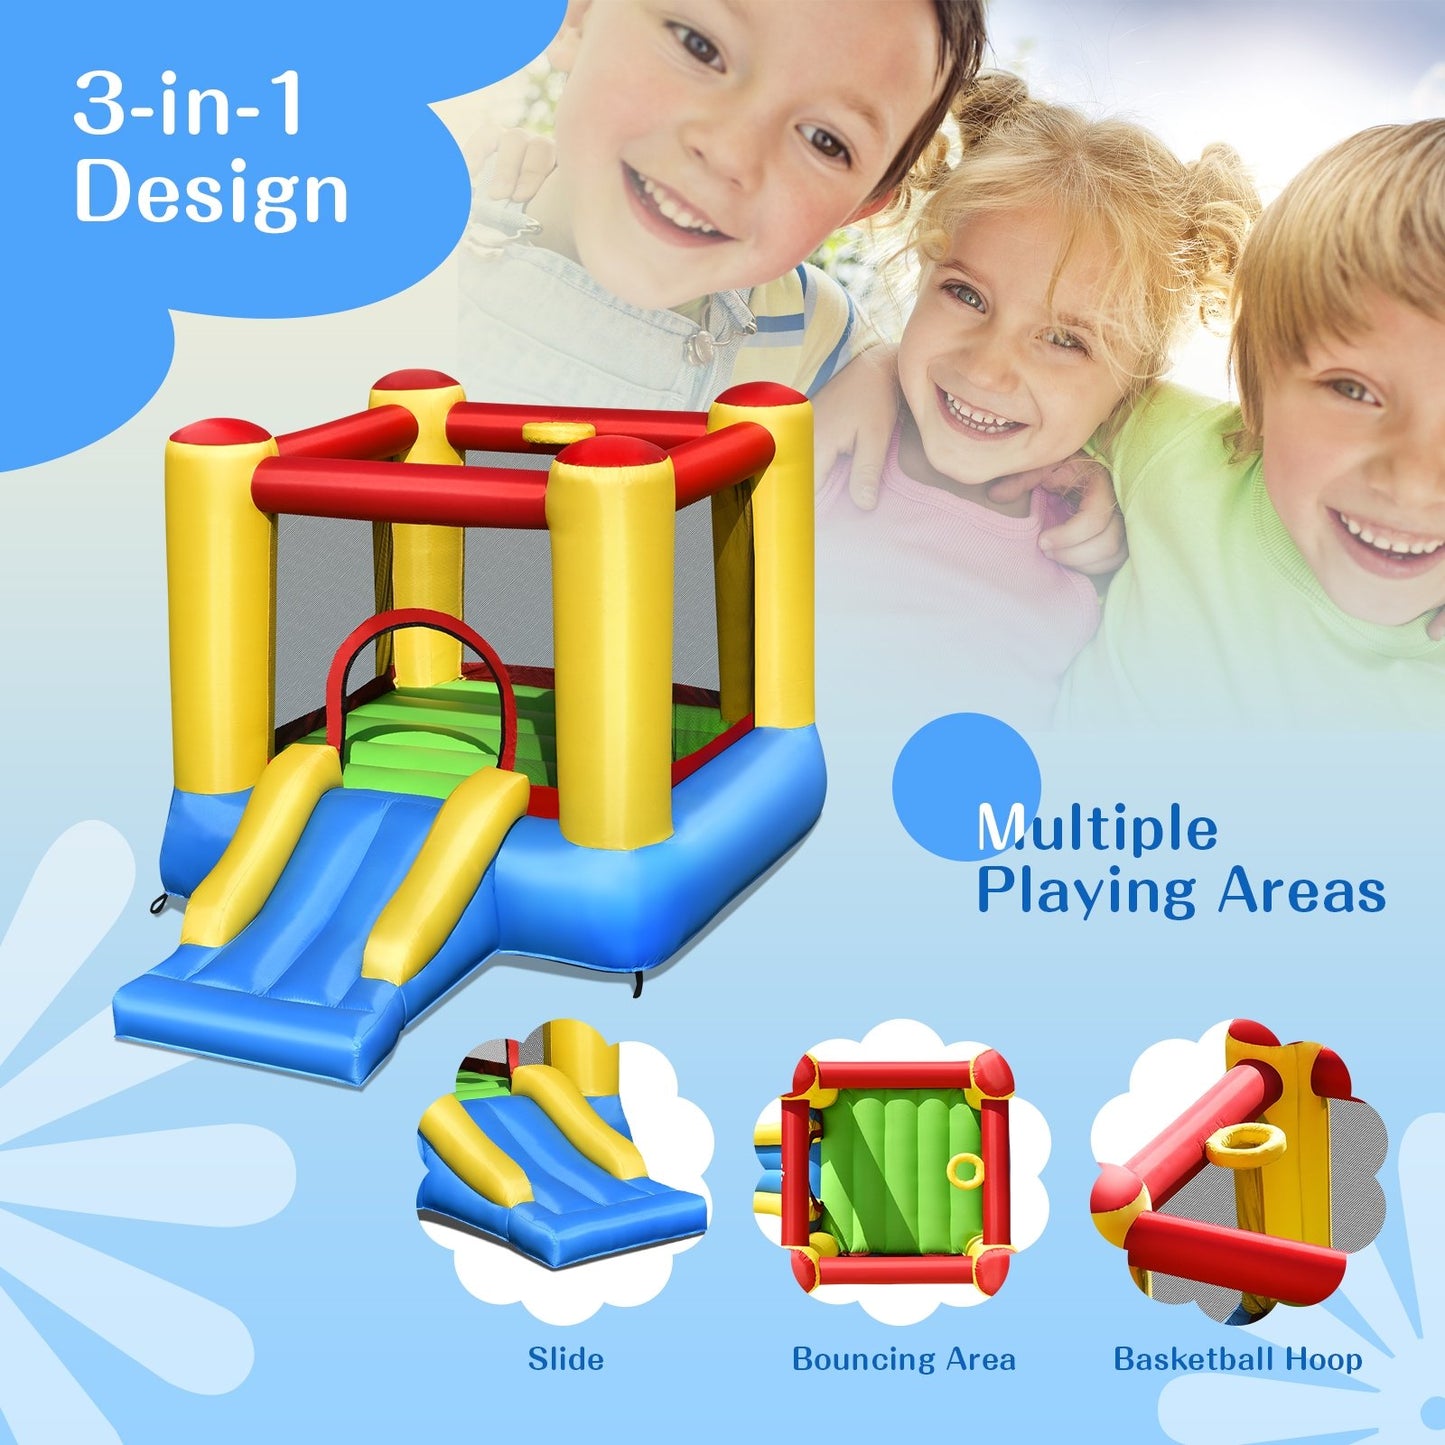 Kids Inflatable Jumping Bounce House without Blower - Gallery Canada